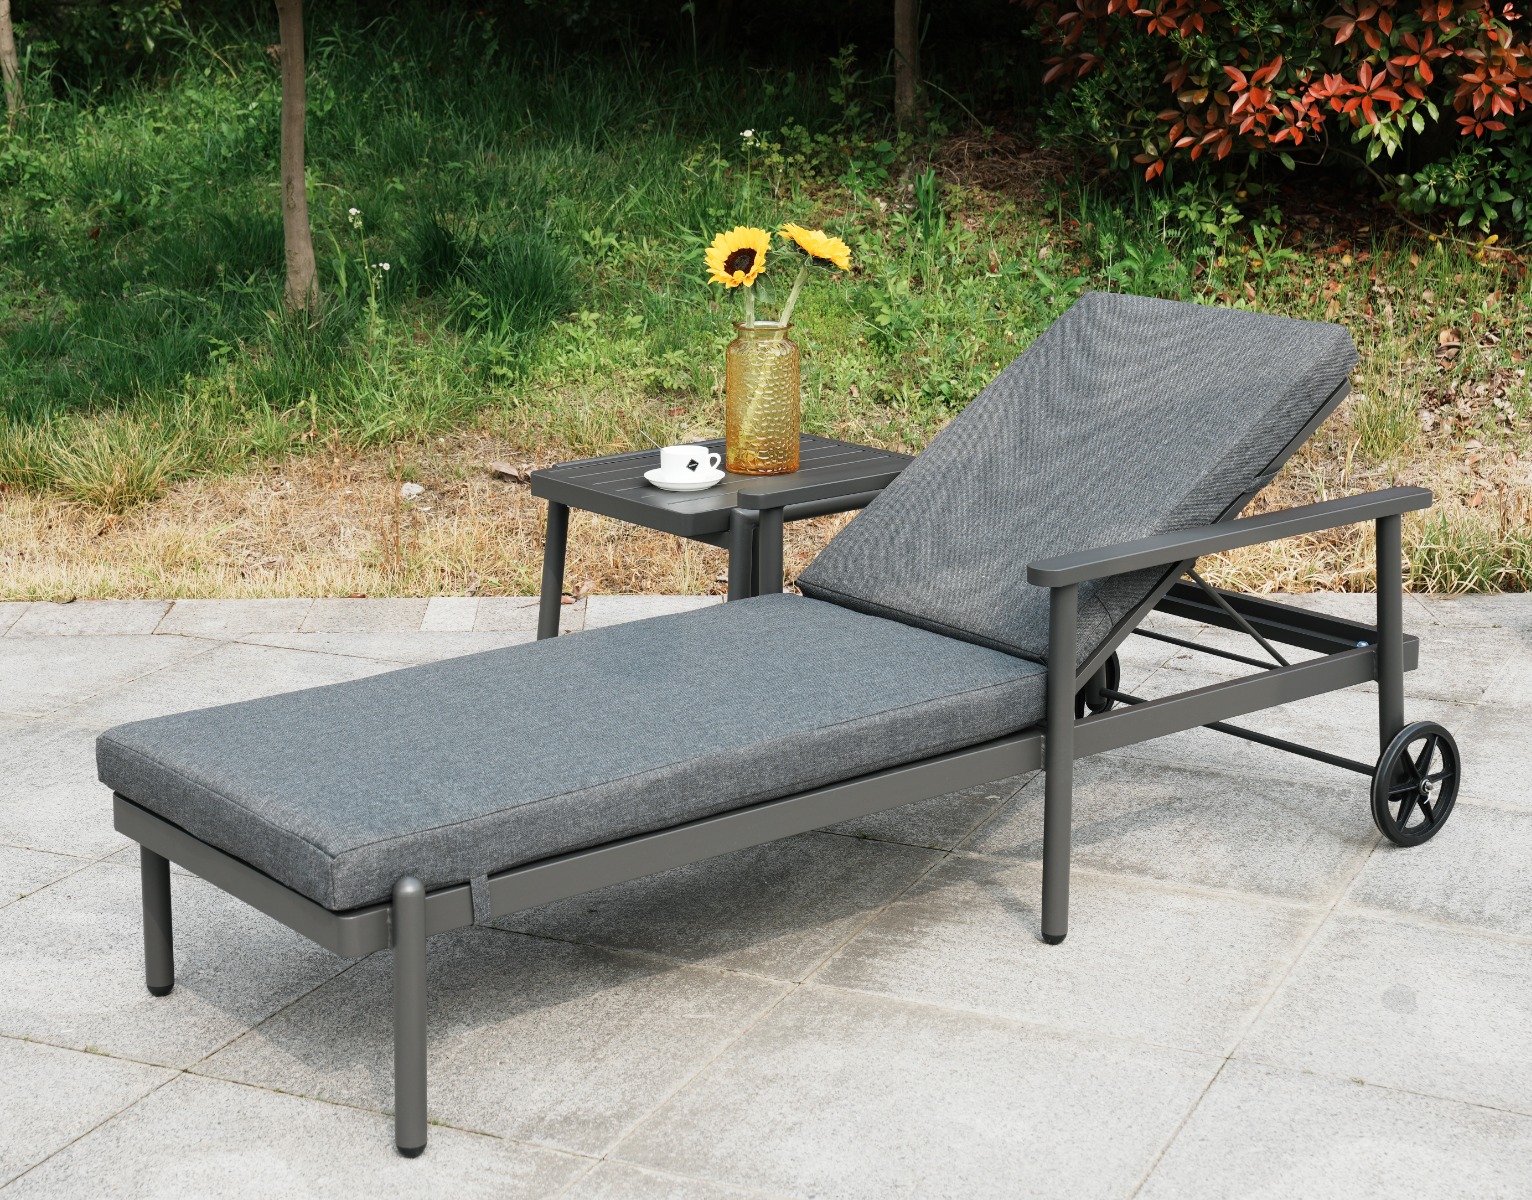 Deluxe Aluminium Sun Lounger with Side Table